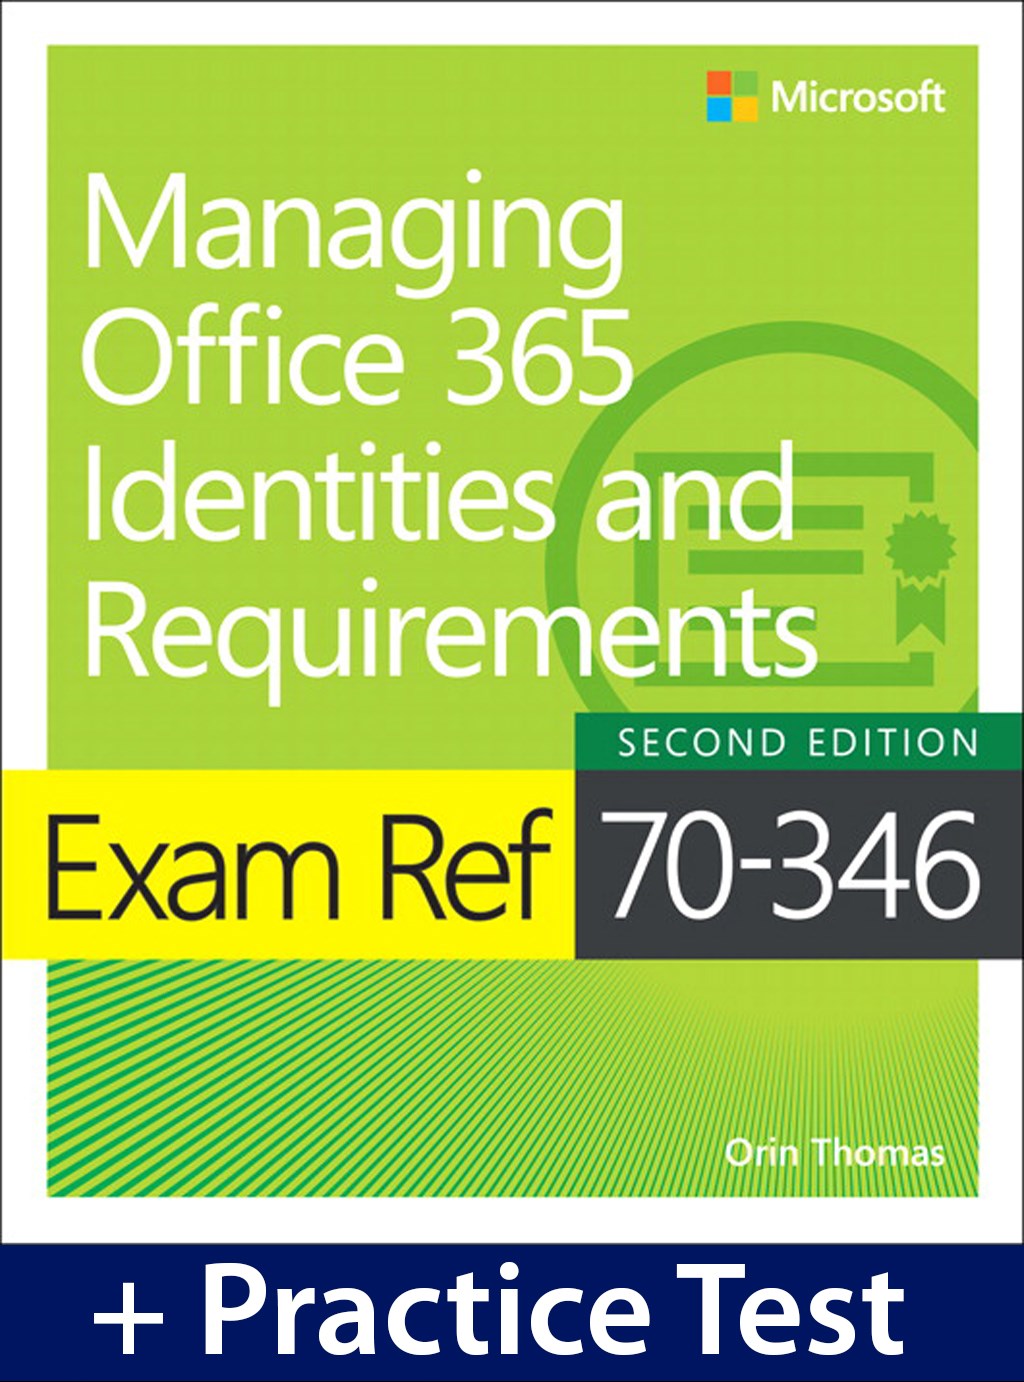 Exam Ref 70-346 Managing Office 365 Identities and Requirements with Practice Test, 2nd Edition